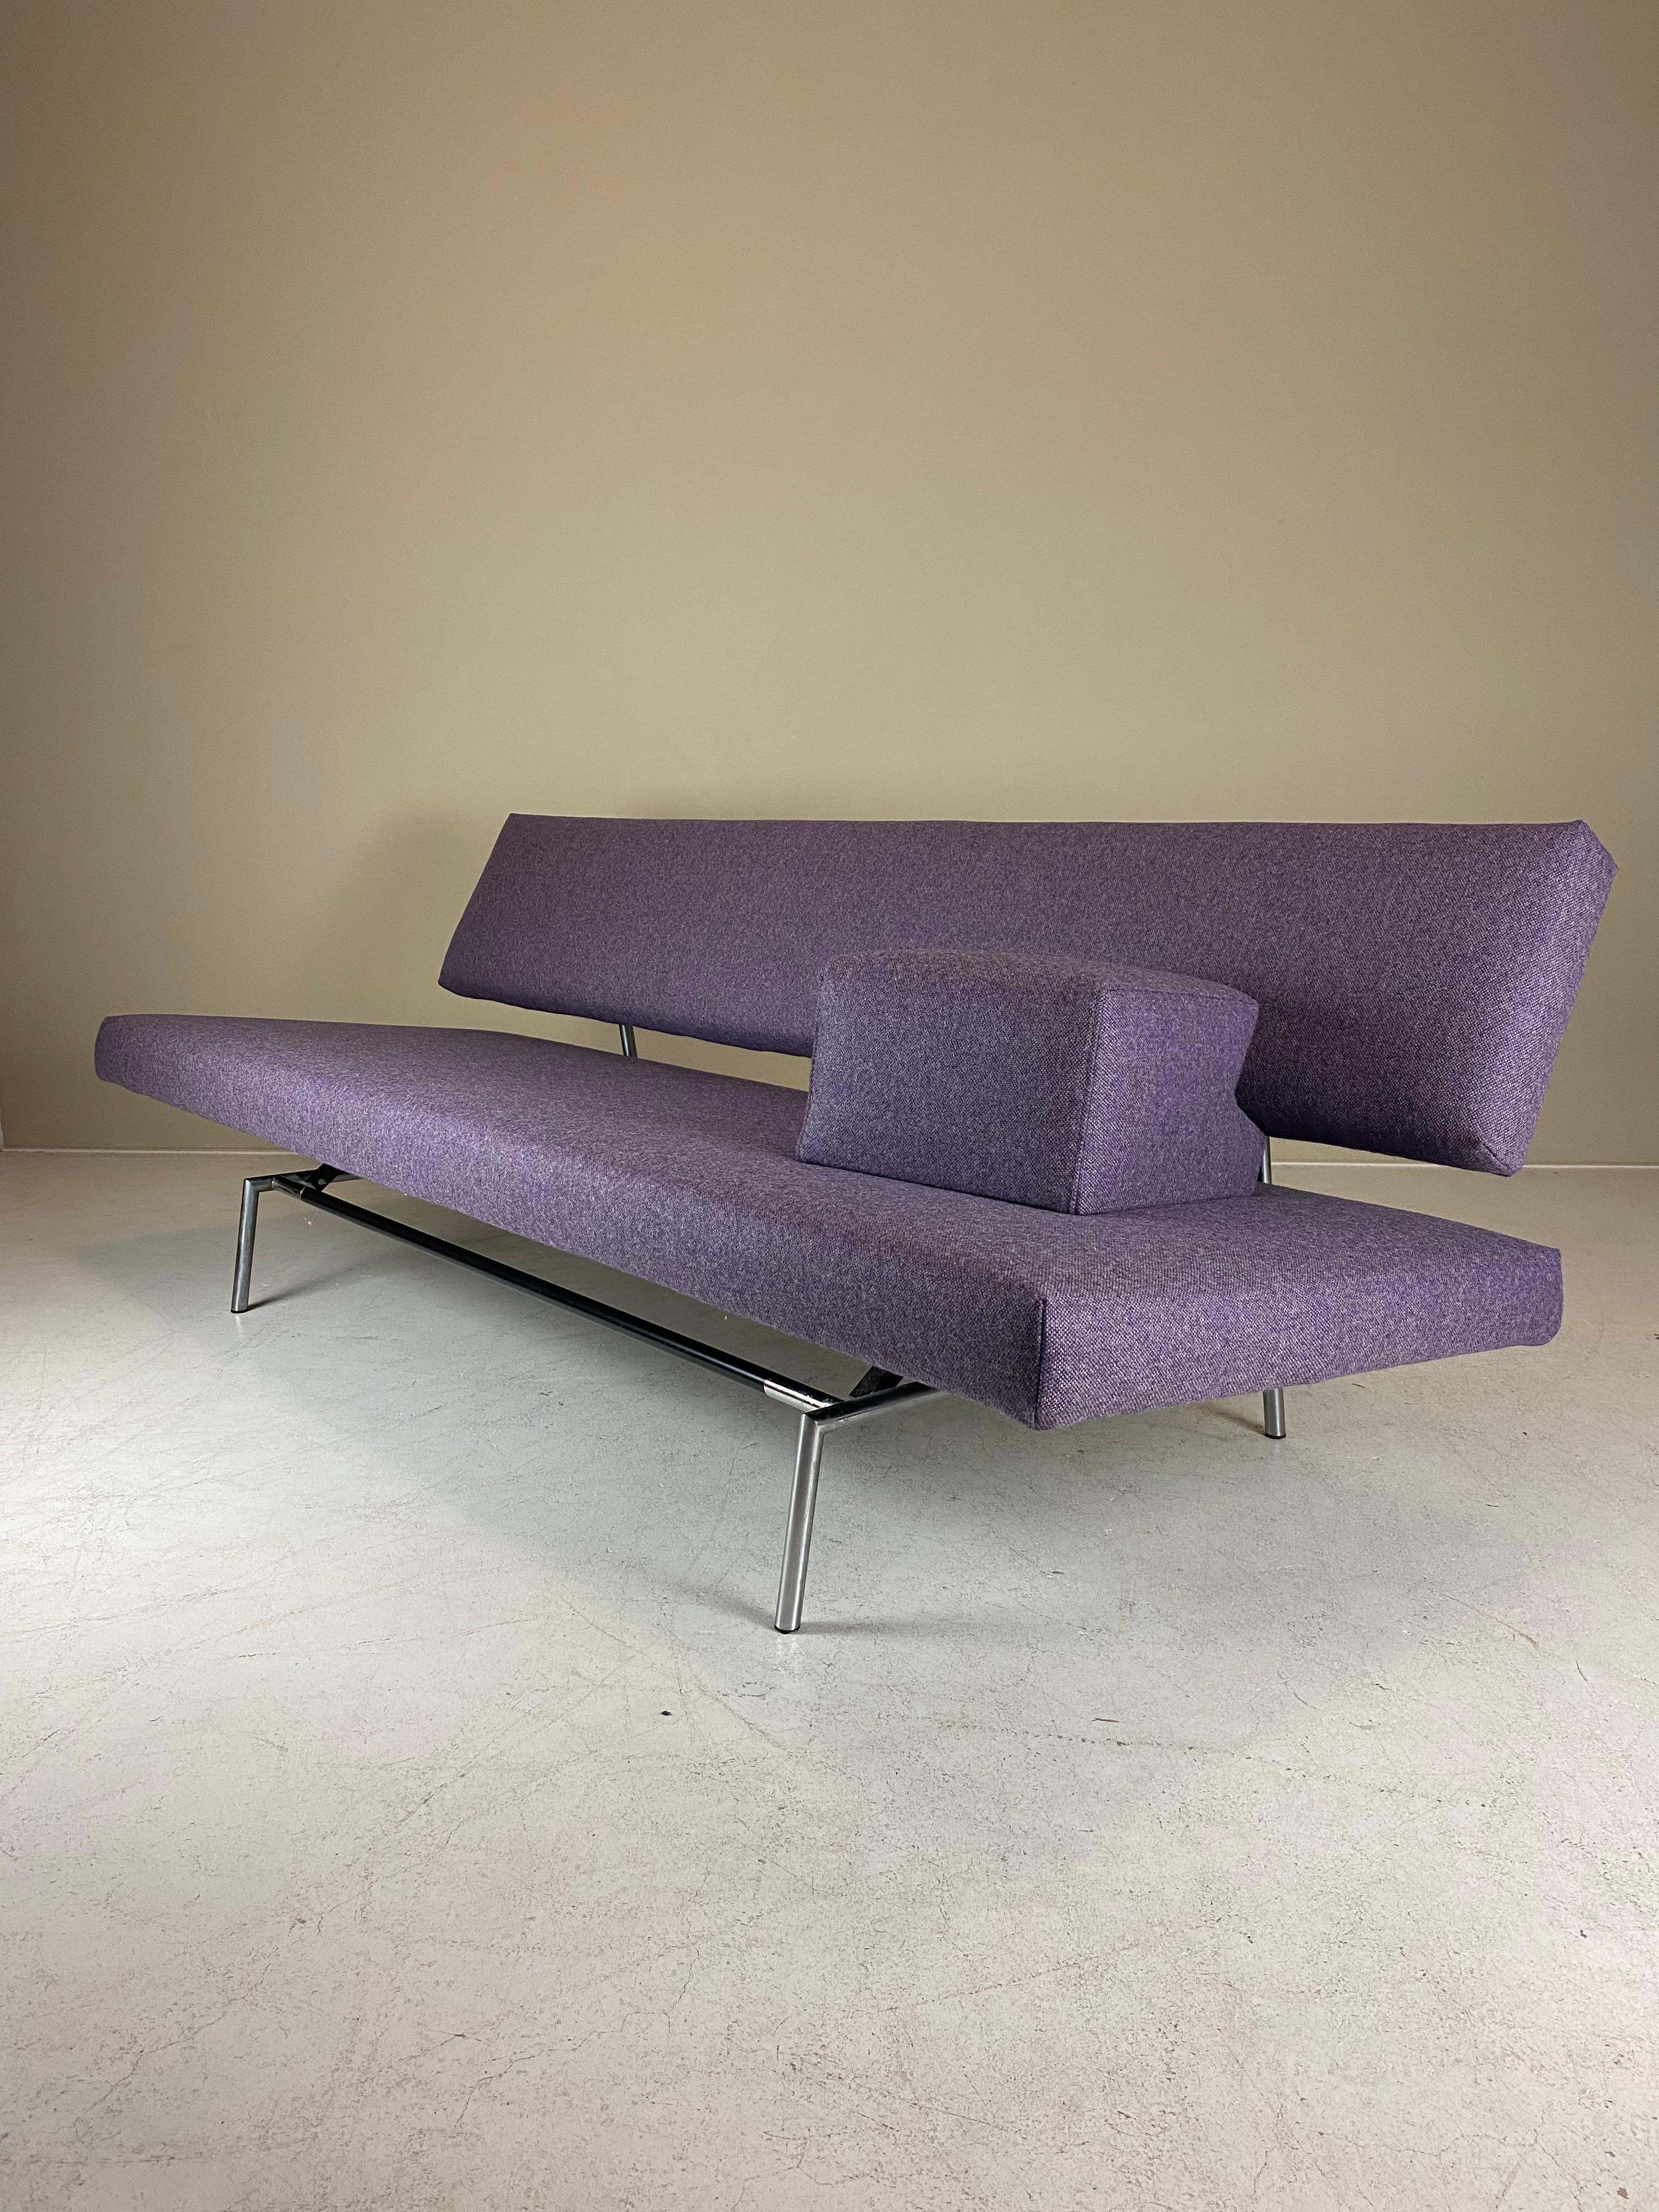 Listed is an iconic BR02 sofa / sofa bed / daybed by Martin Visser for 't Spectrum. Designed in 1960, this minimalist sofa can be converted in bed with one simple movement. Model no. BR02 refers to the round metal frame — the most sought after